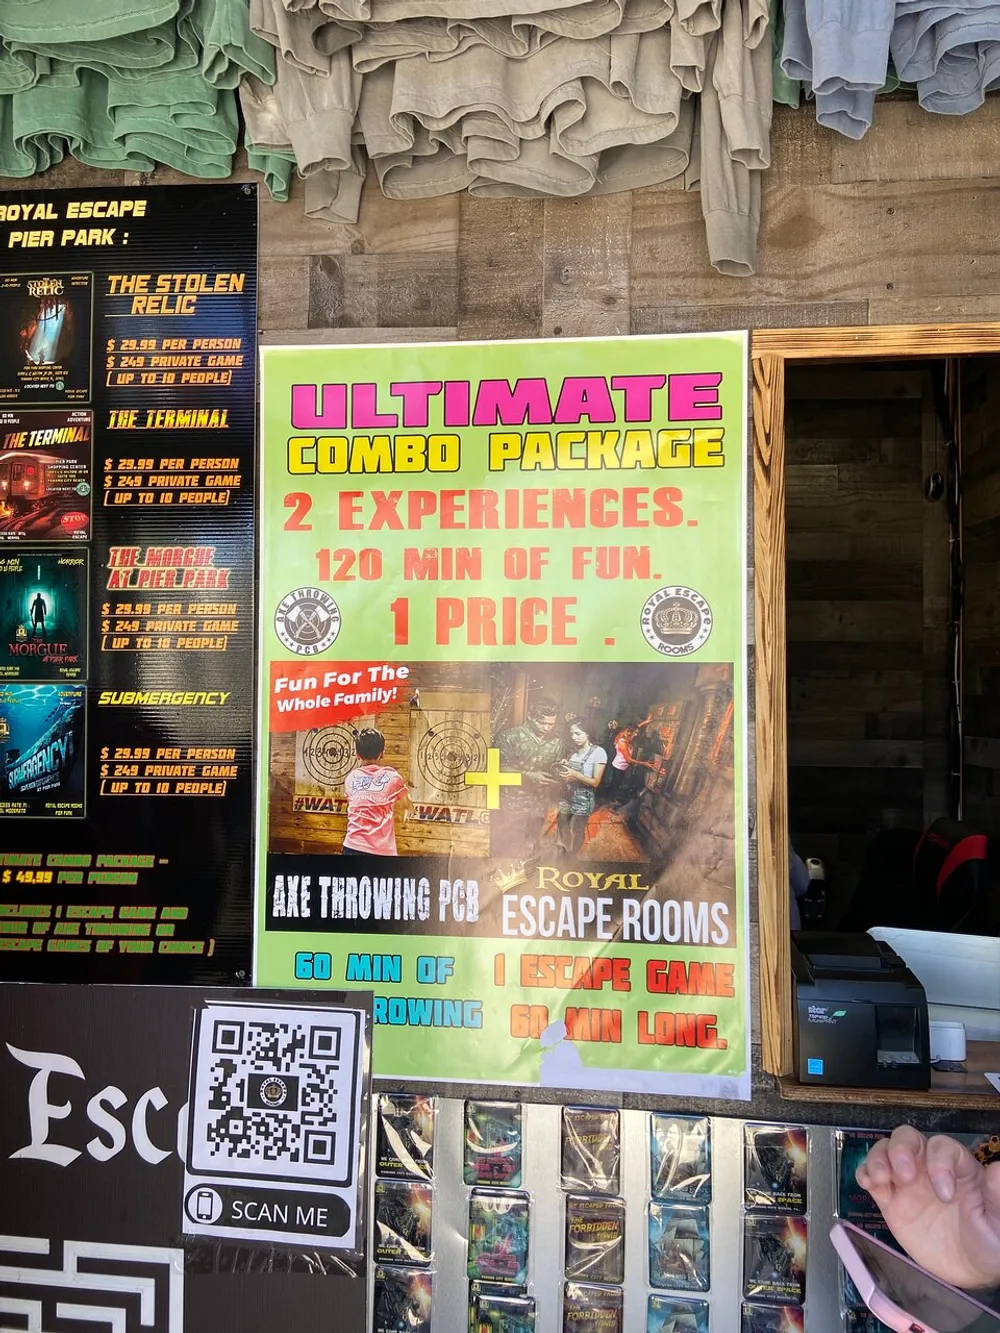 The image shows a promotional advertisement for an Ultimate Combo Package offering two experiences axe throwing and escape room games which amount to 120 minutes of fun for a single price